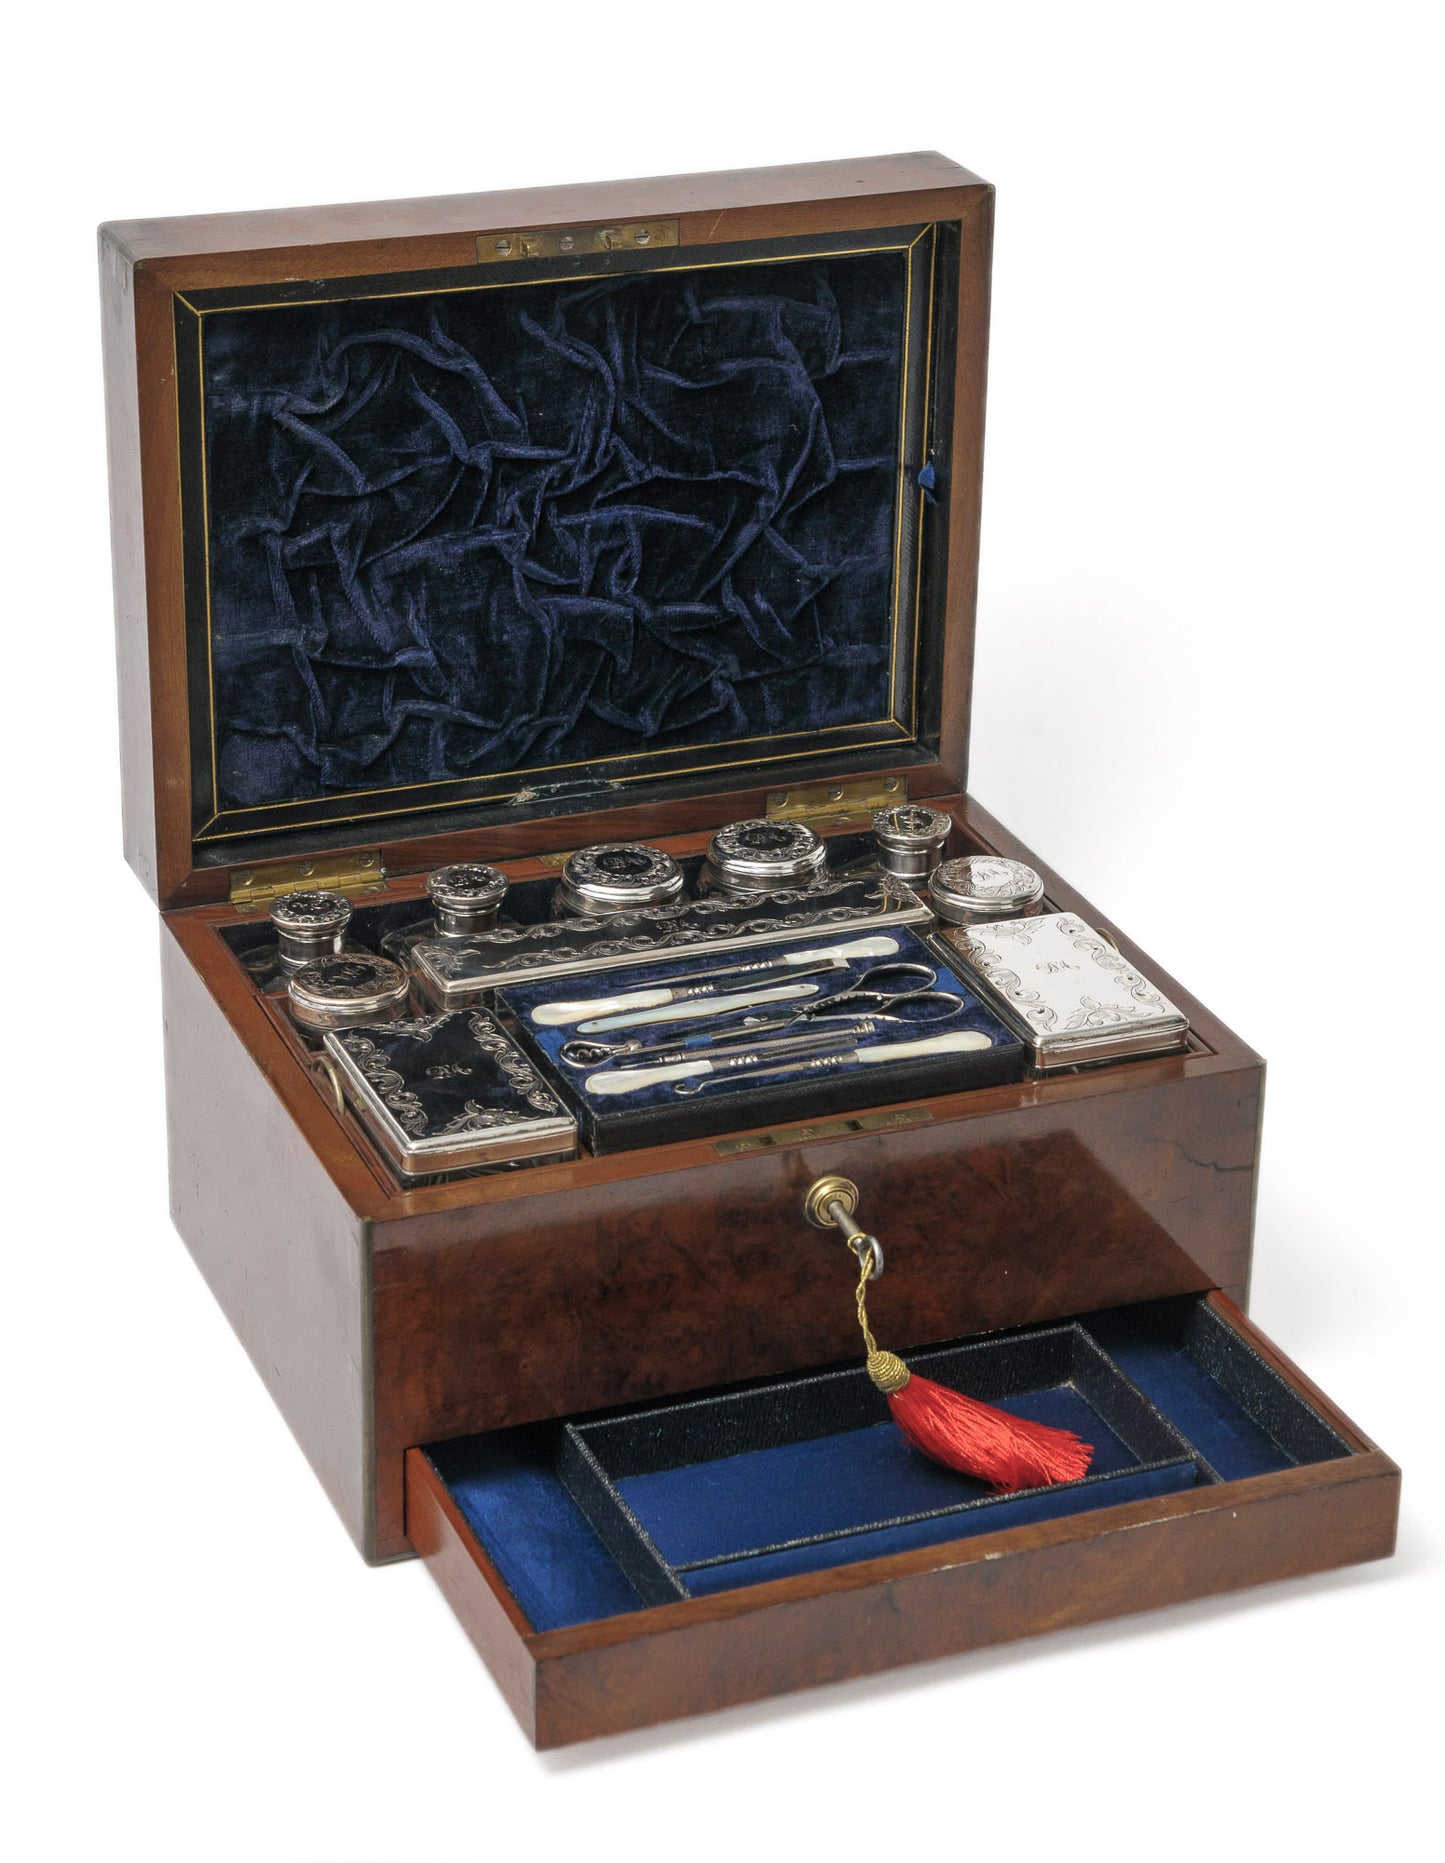 Antique Burr Walnut Dressing Case Box & Silver Plated Fittings by Samuel Fisher of London (Code 1082)